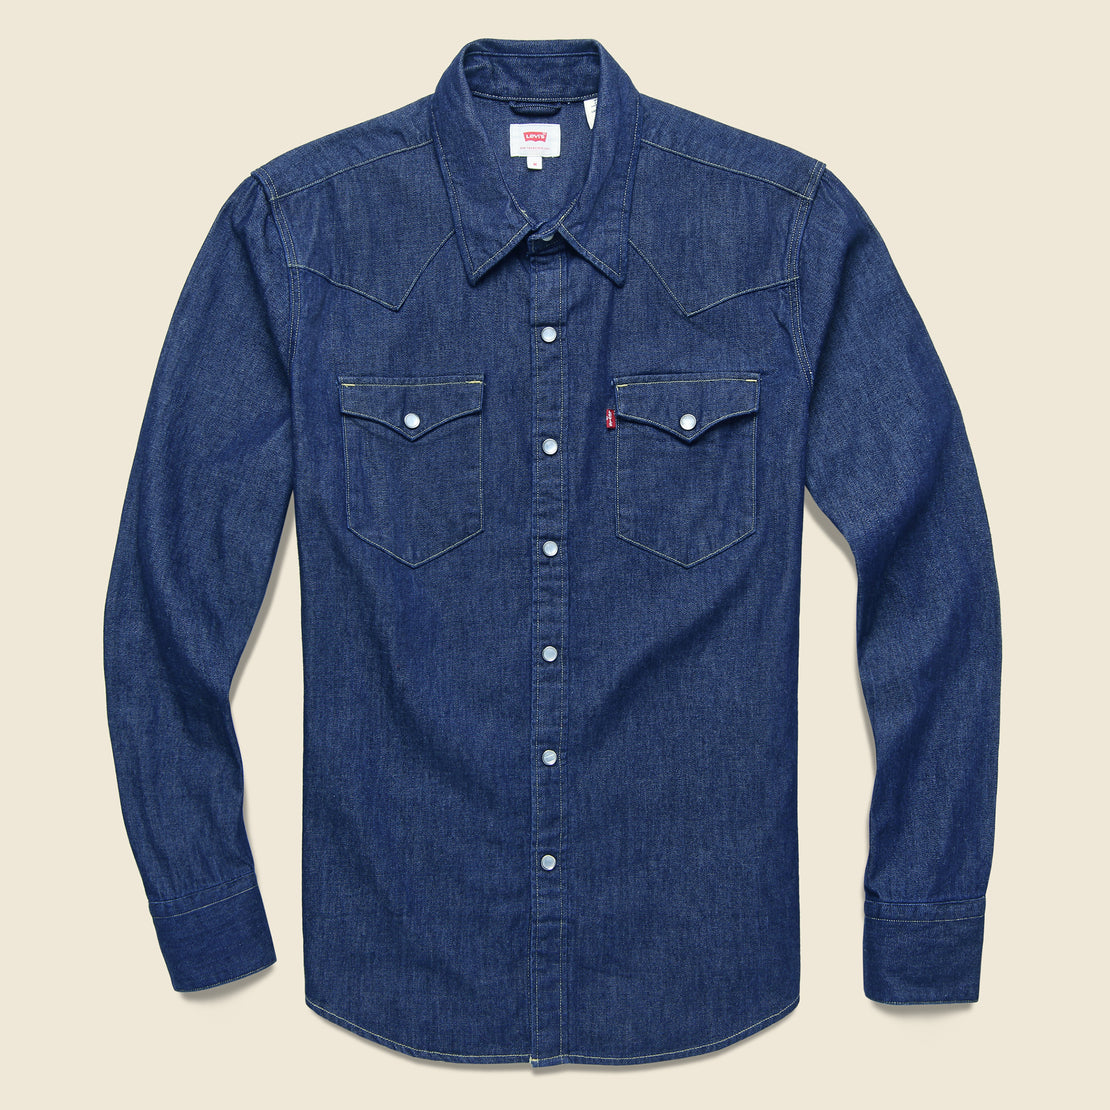 Red Headed Stranger Western Shirt - Dark Wash - Future Vagabond - STAG Provisions - Tops - L/S Woven - Solid